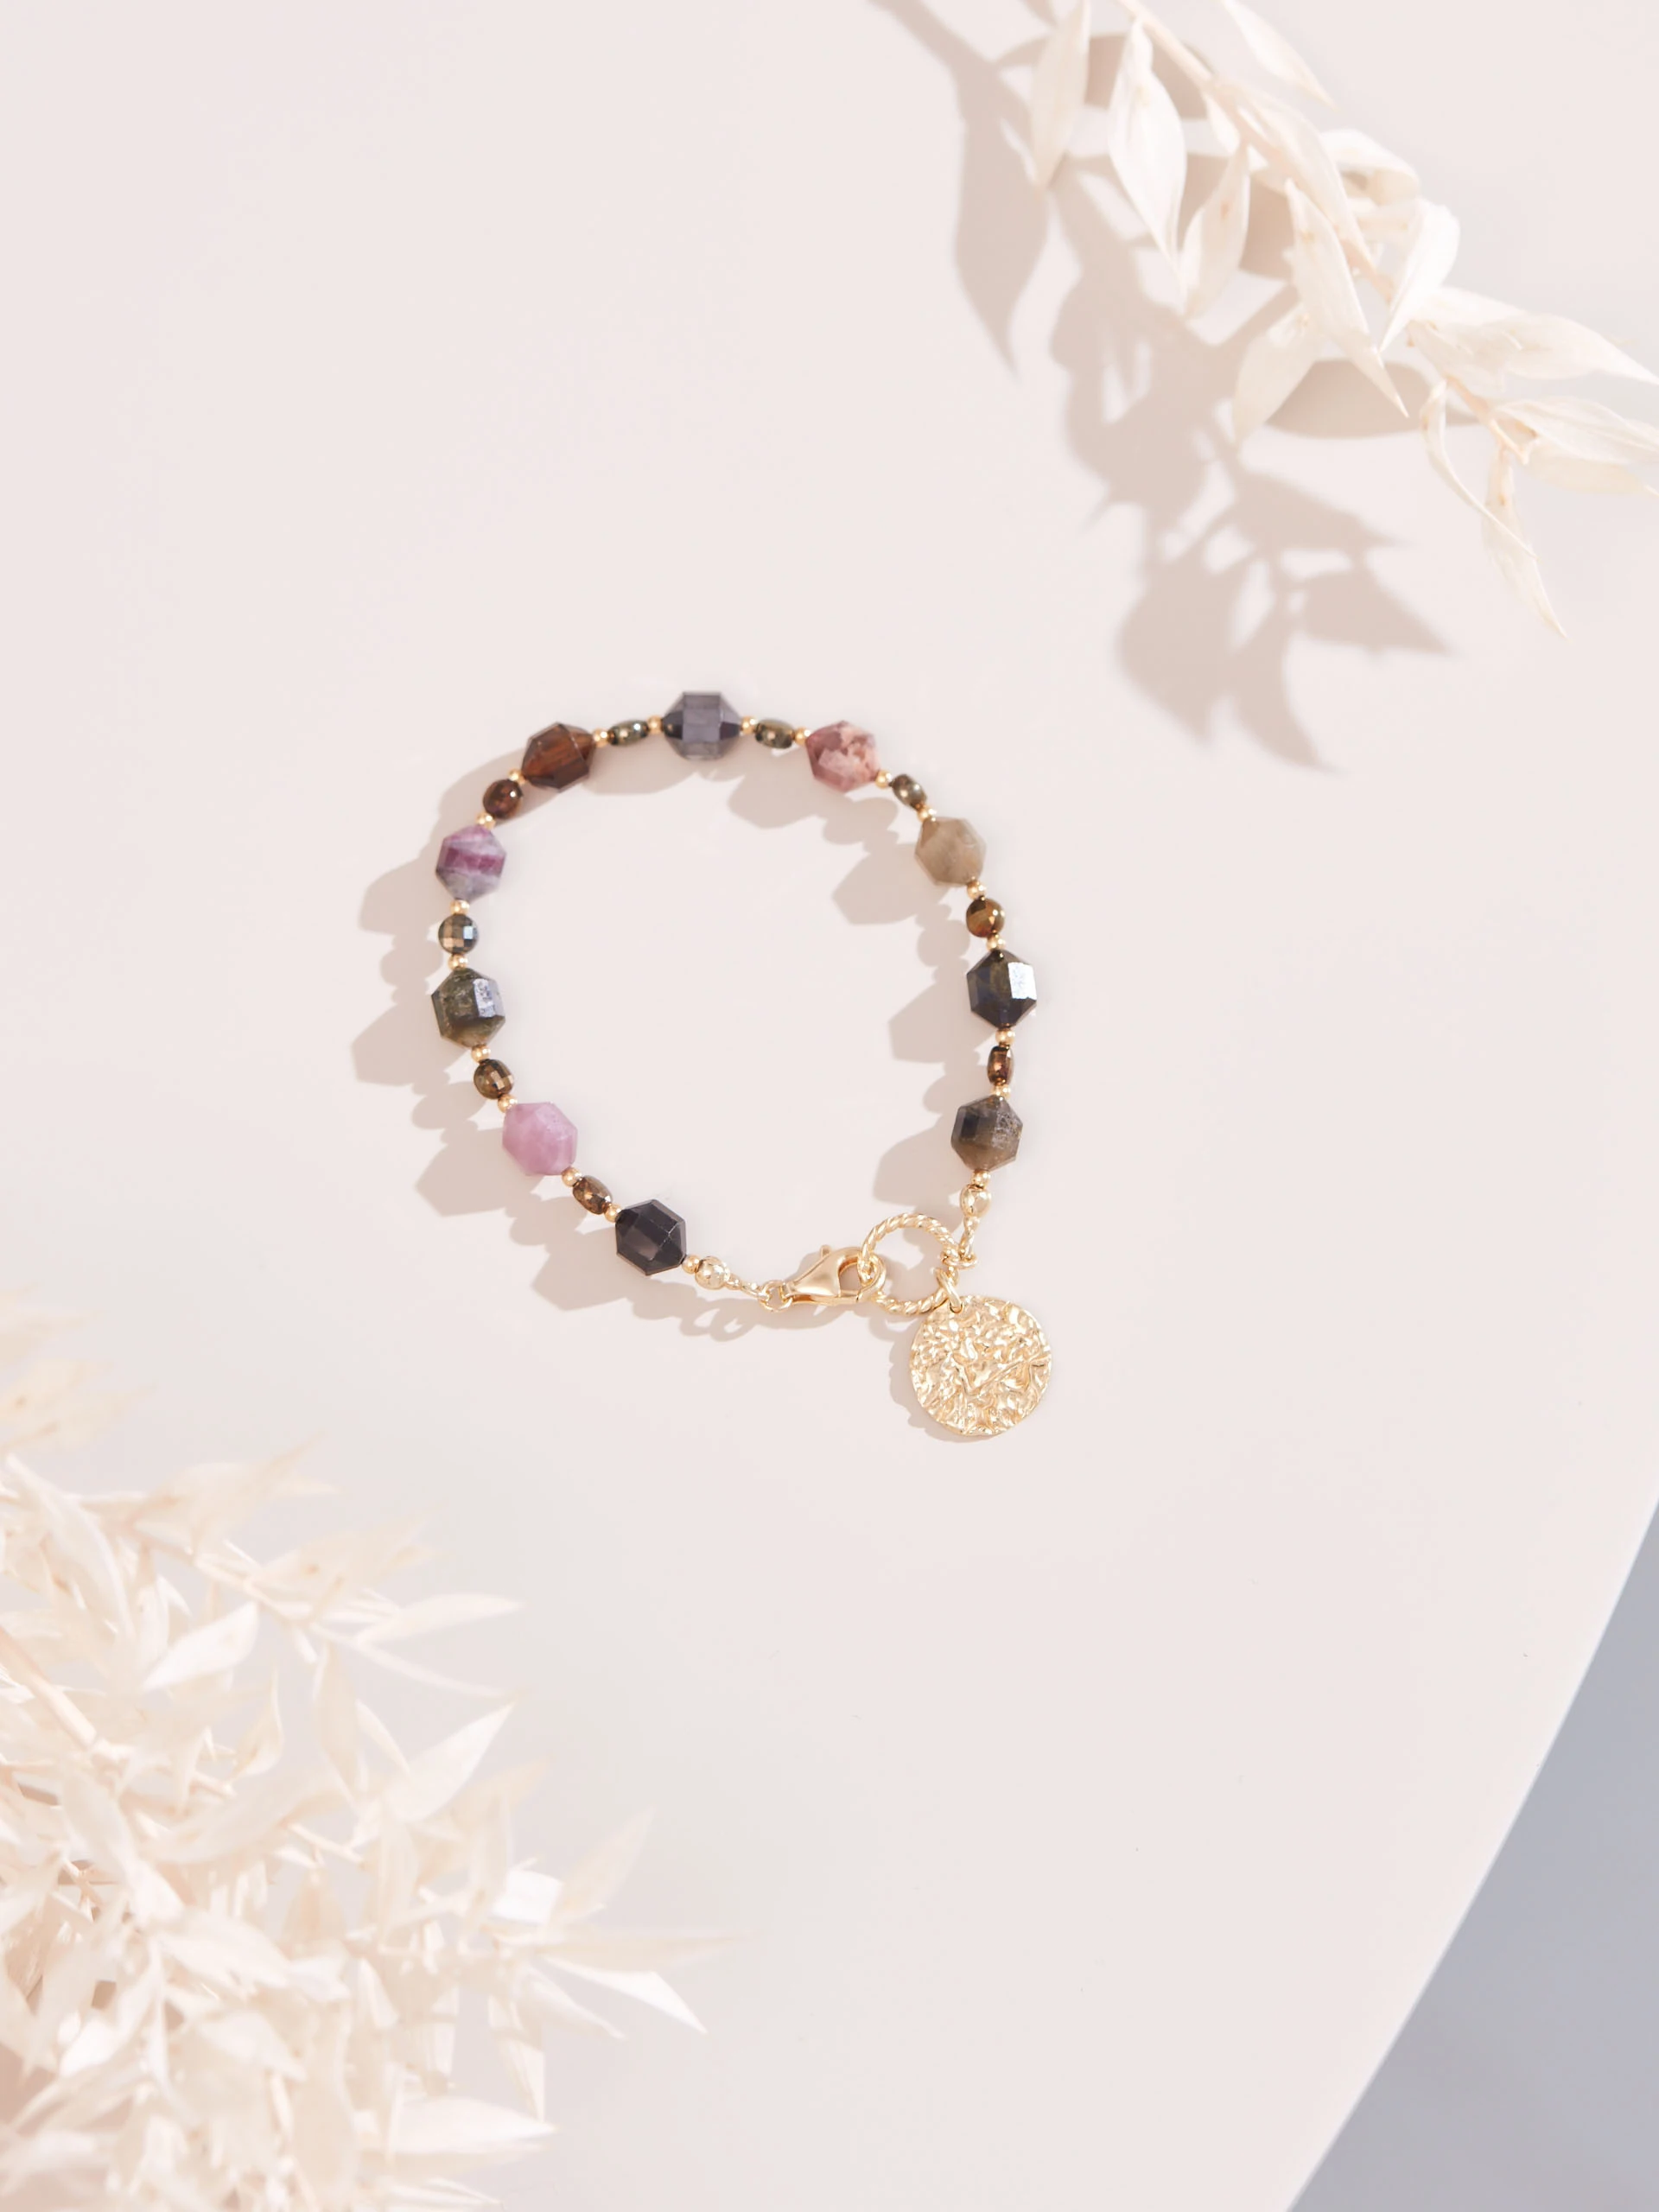 BRACELET WITH COLORED STONES AND COIN